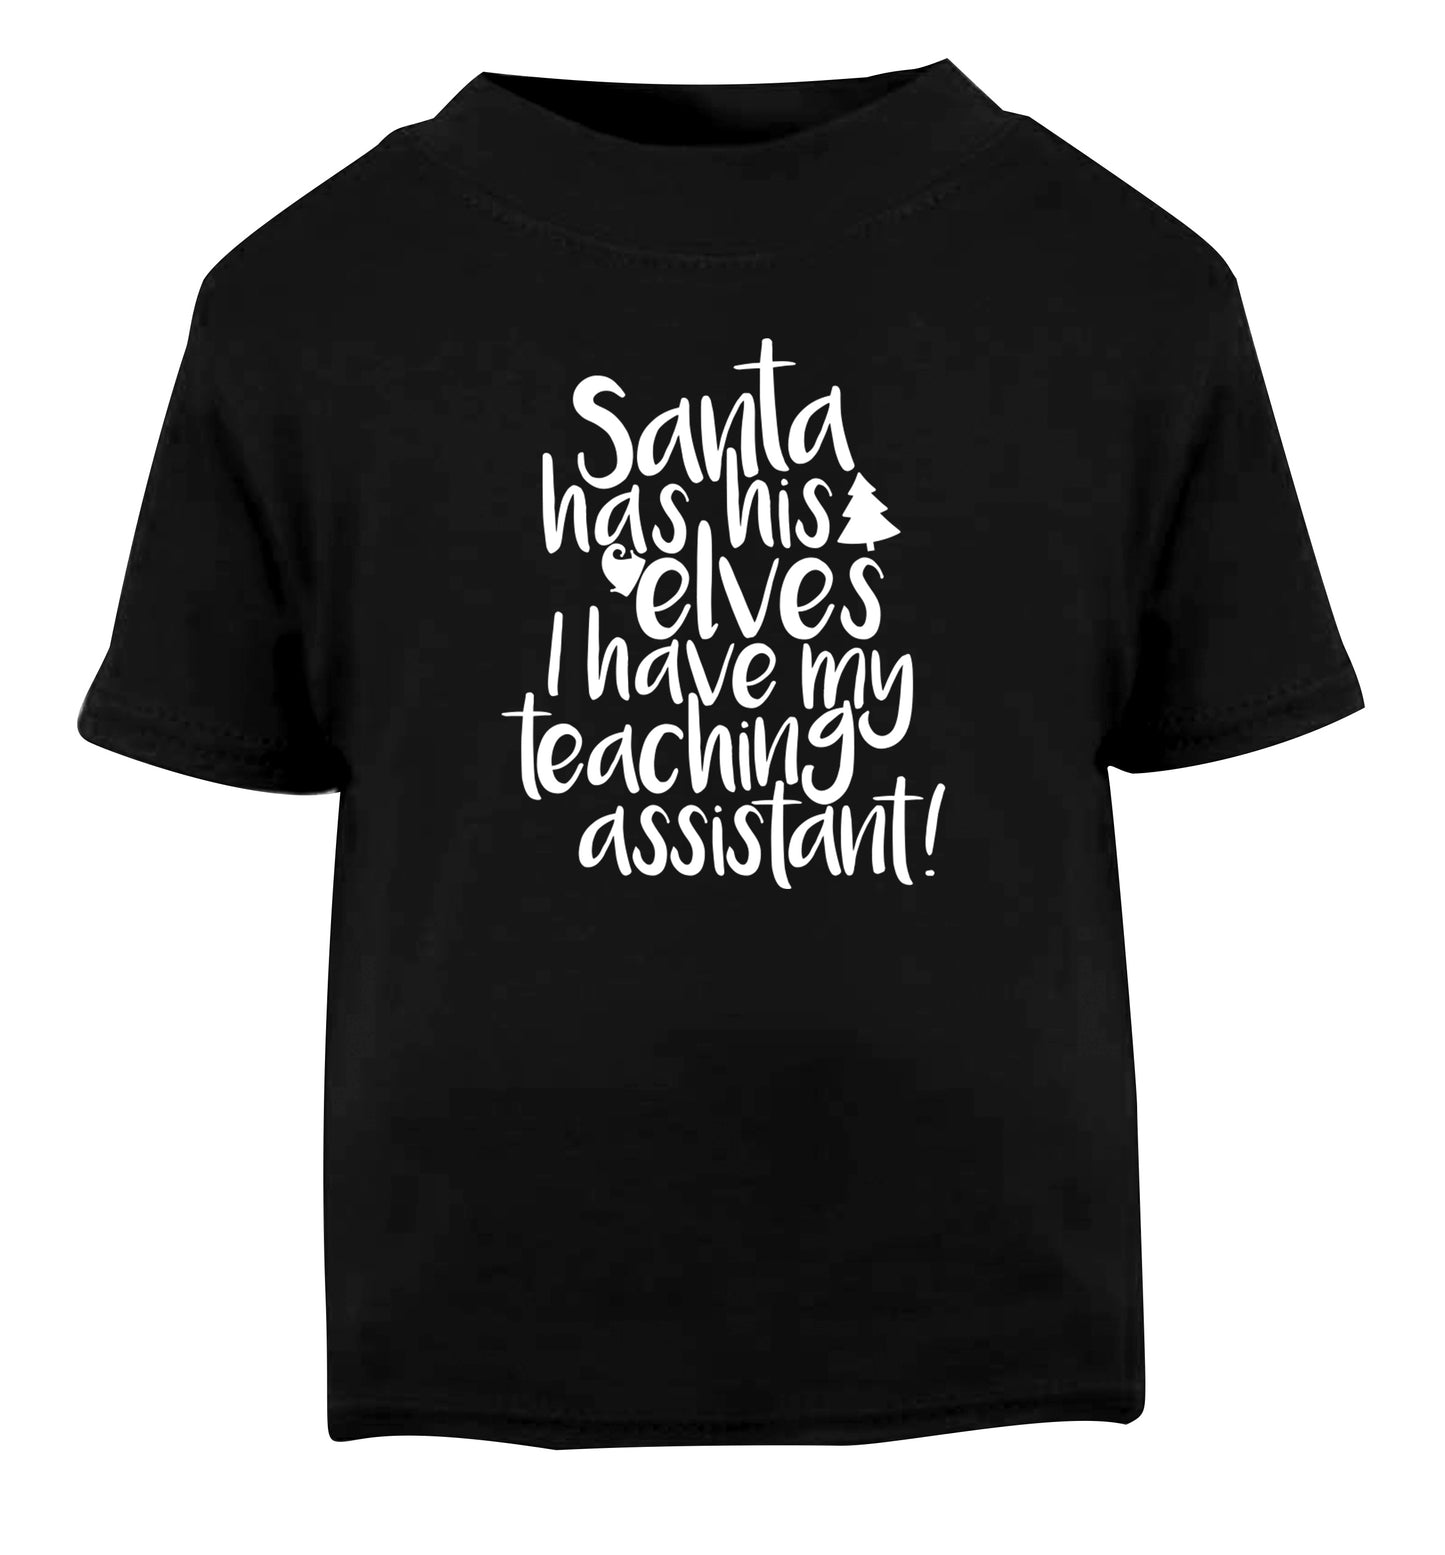 Santa has his elves I have my teaching assistant Black Baby Toddler Tshirt 2 years